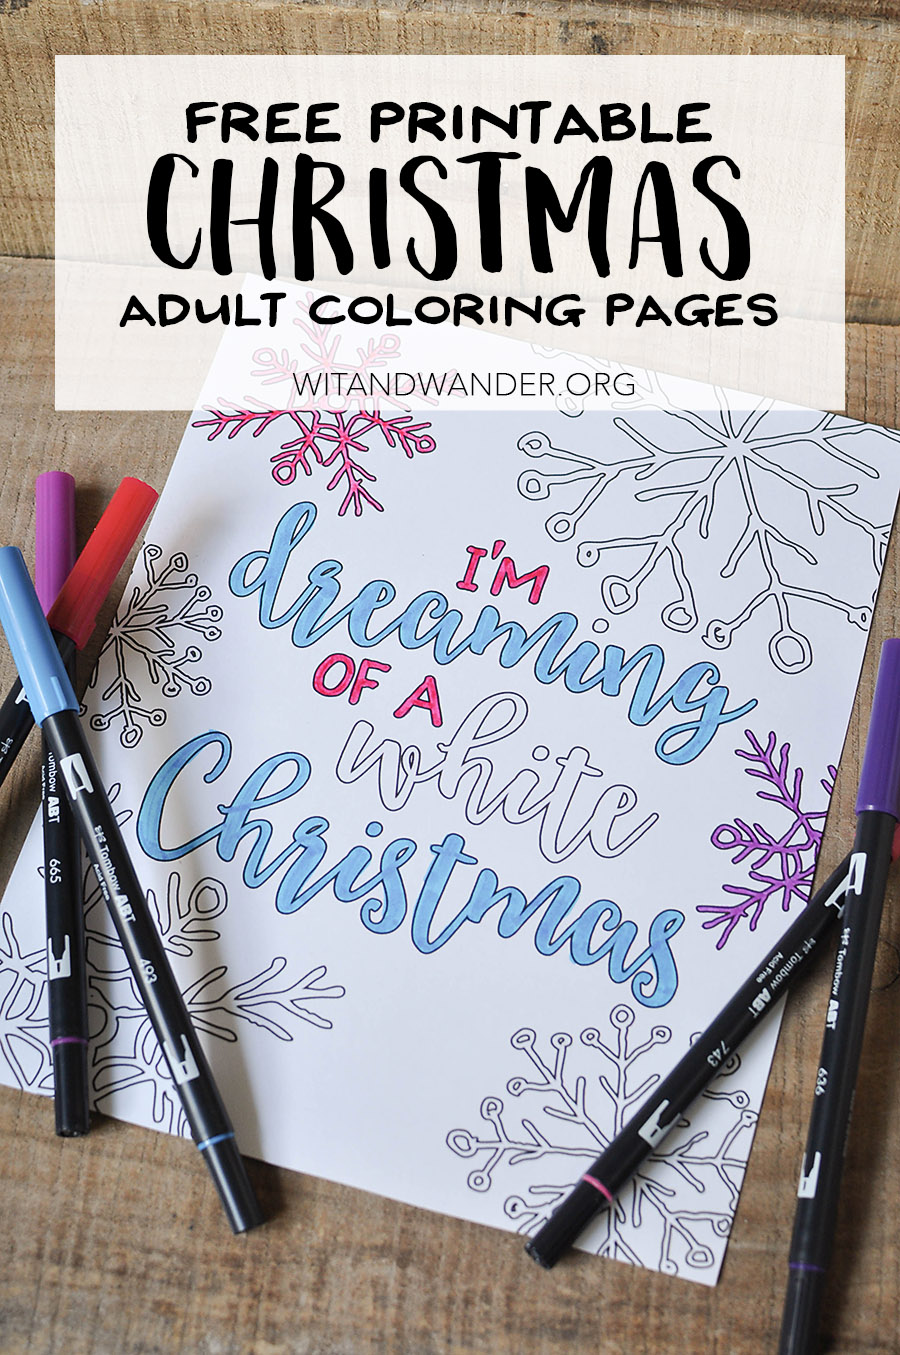 Free Printable White Christmas Adult Coloring Pages - Our ...